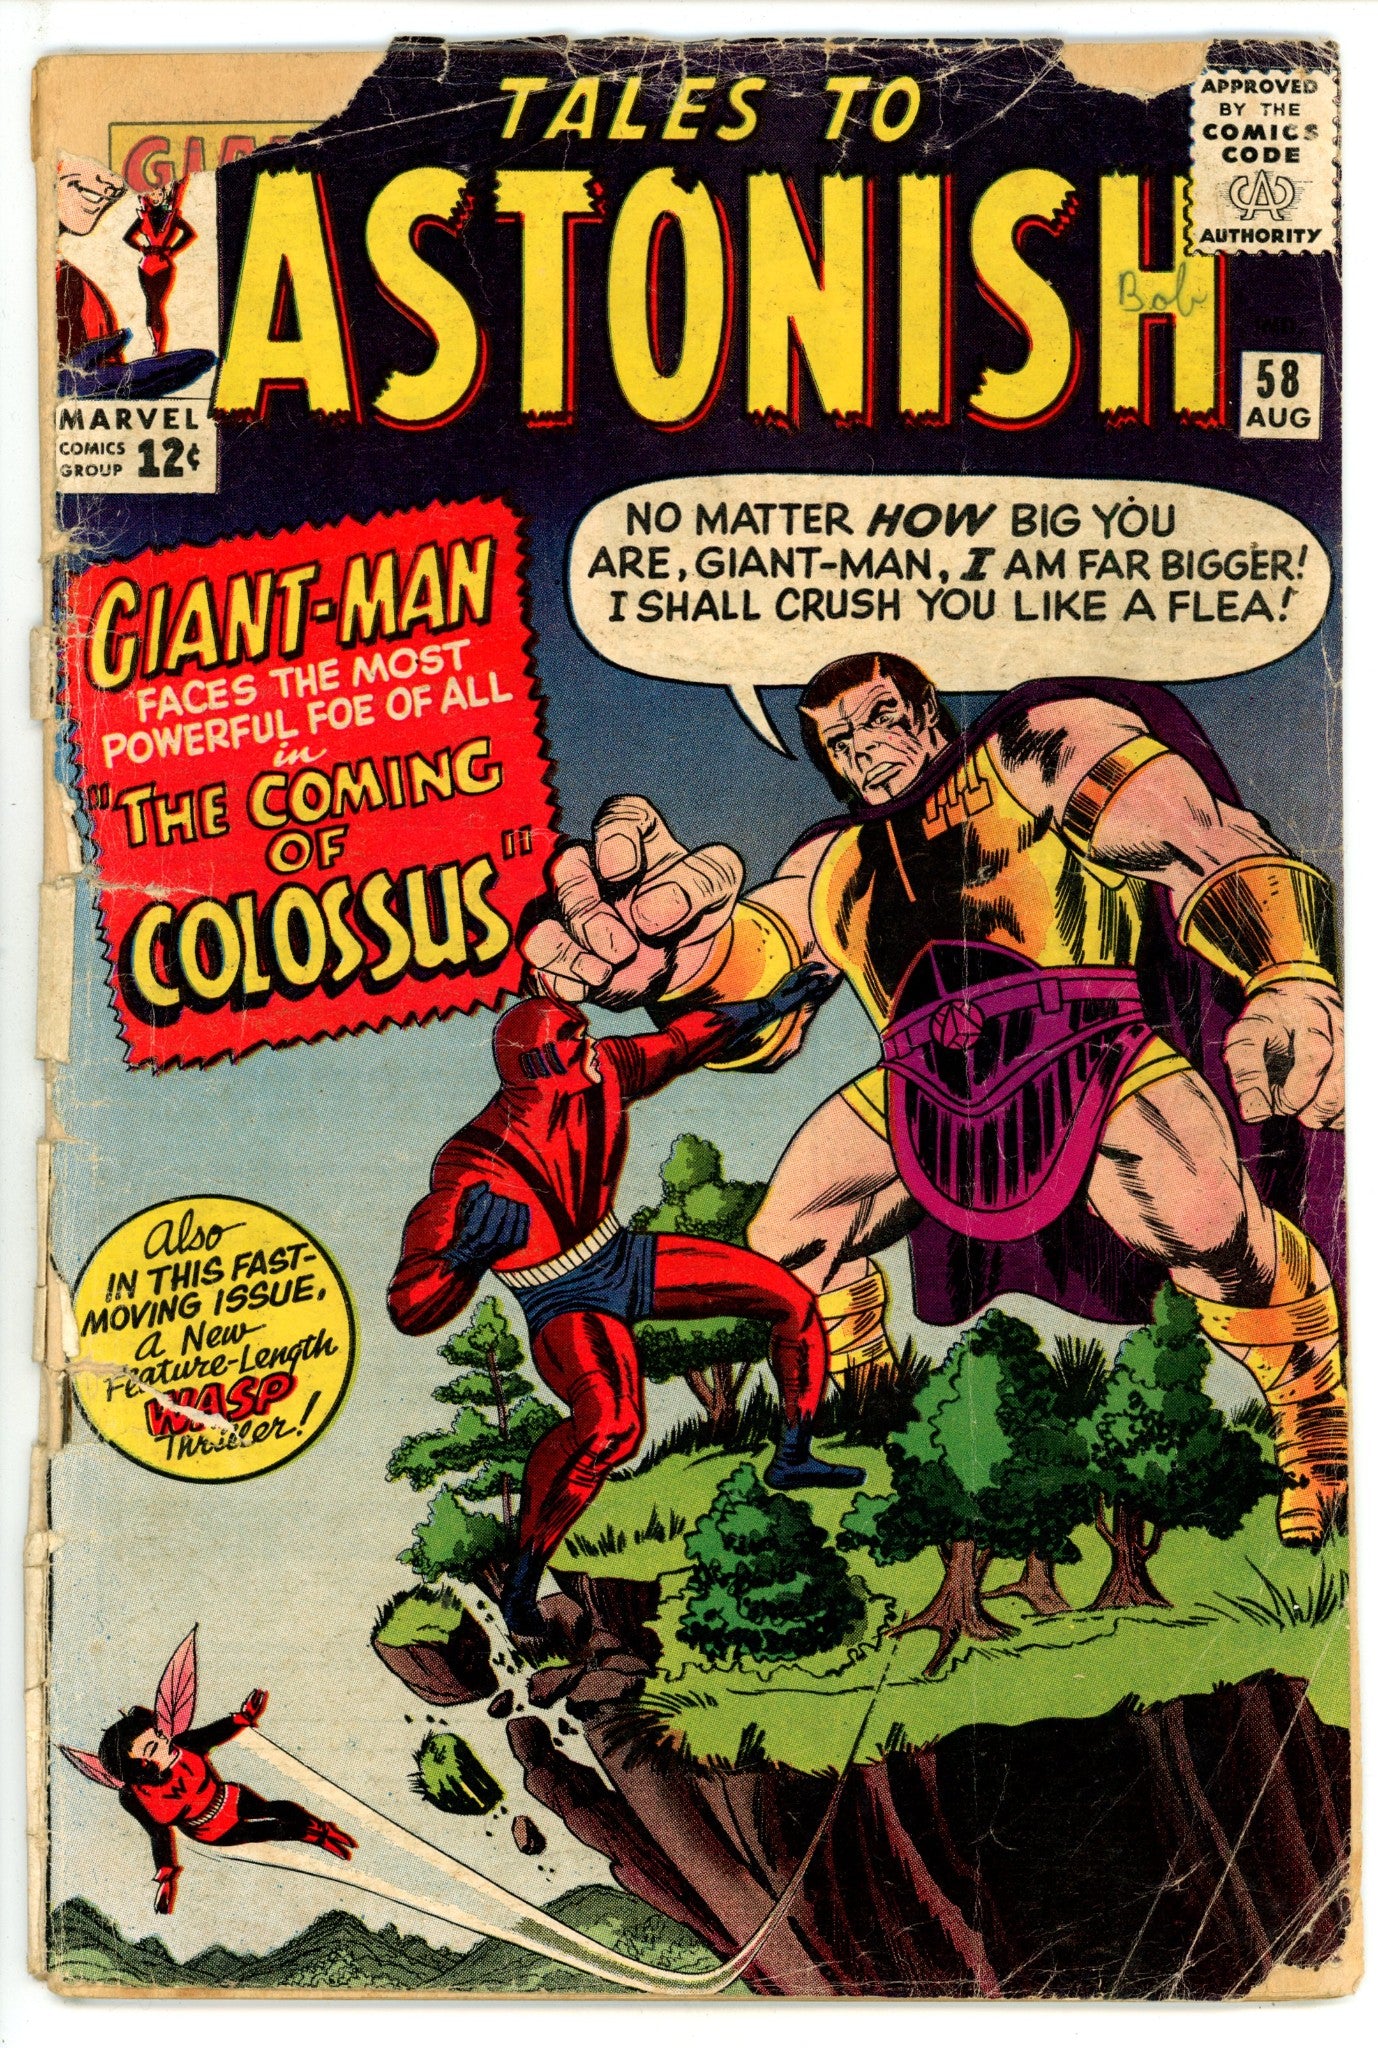 Tales to Astonish Vol 1 58 Missing 1/2 Back Cover (1964) 